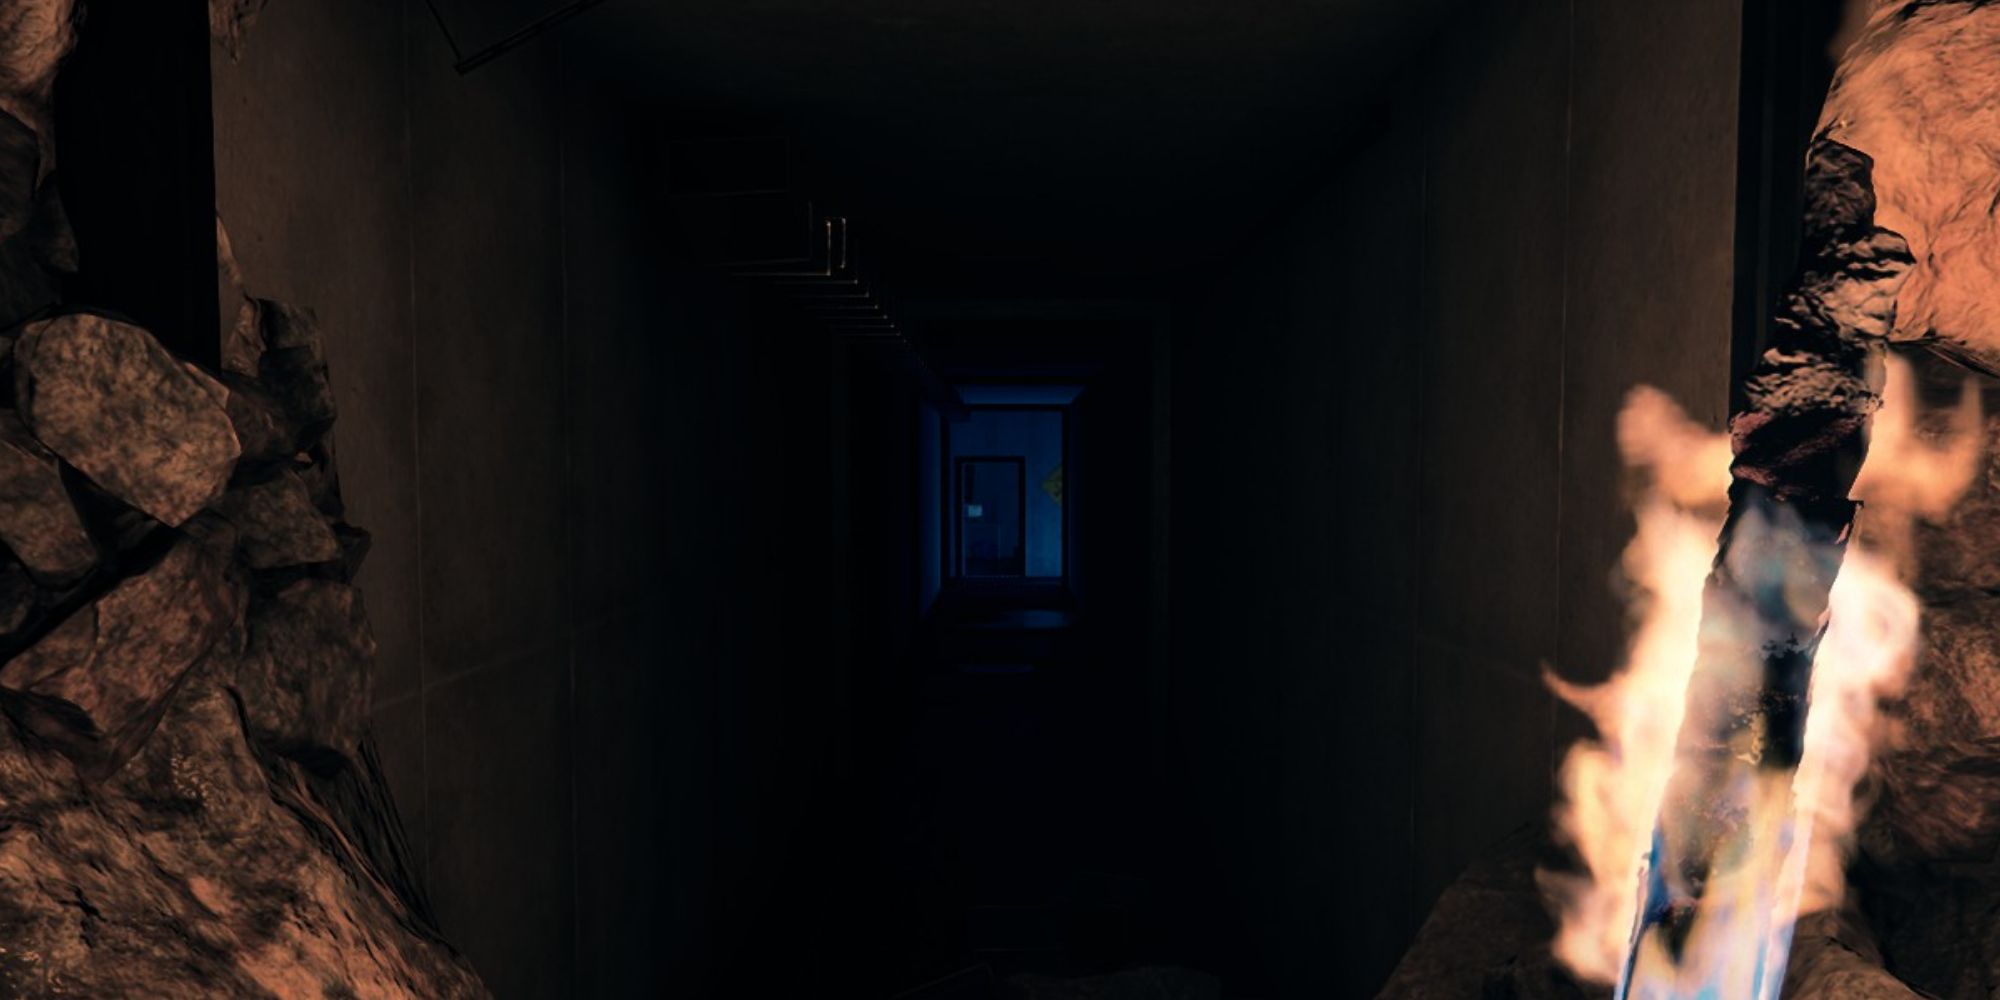 A screenshot from Sons of the Forest showing the player character holding a lit torch while staring down a long and dark hallway at the end of a cave with blue light and a door at the end.